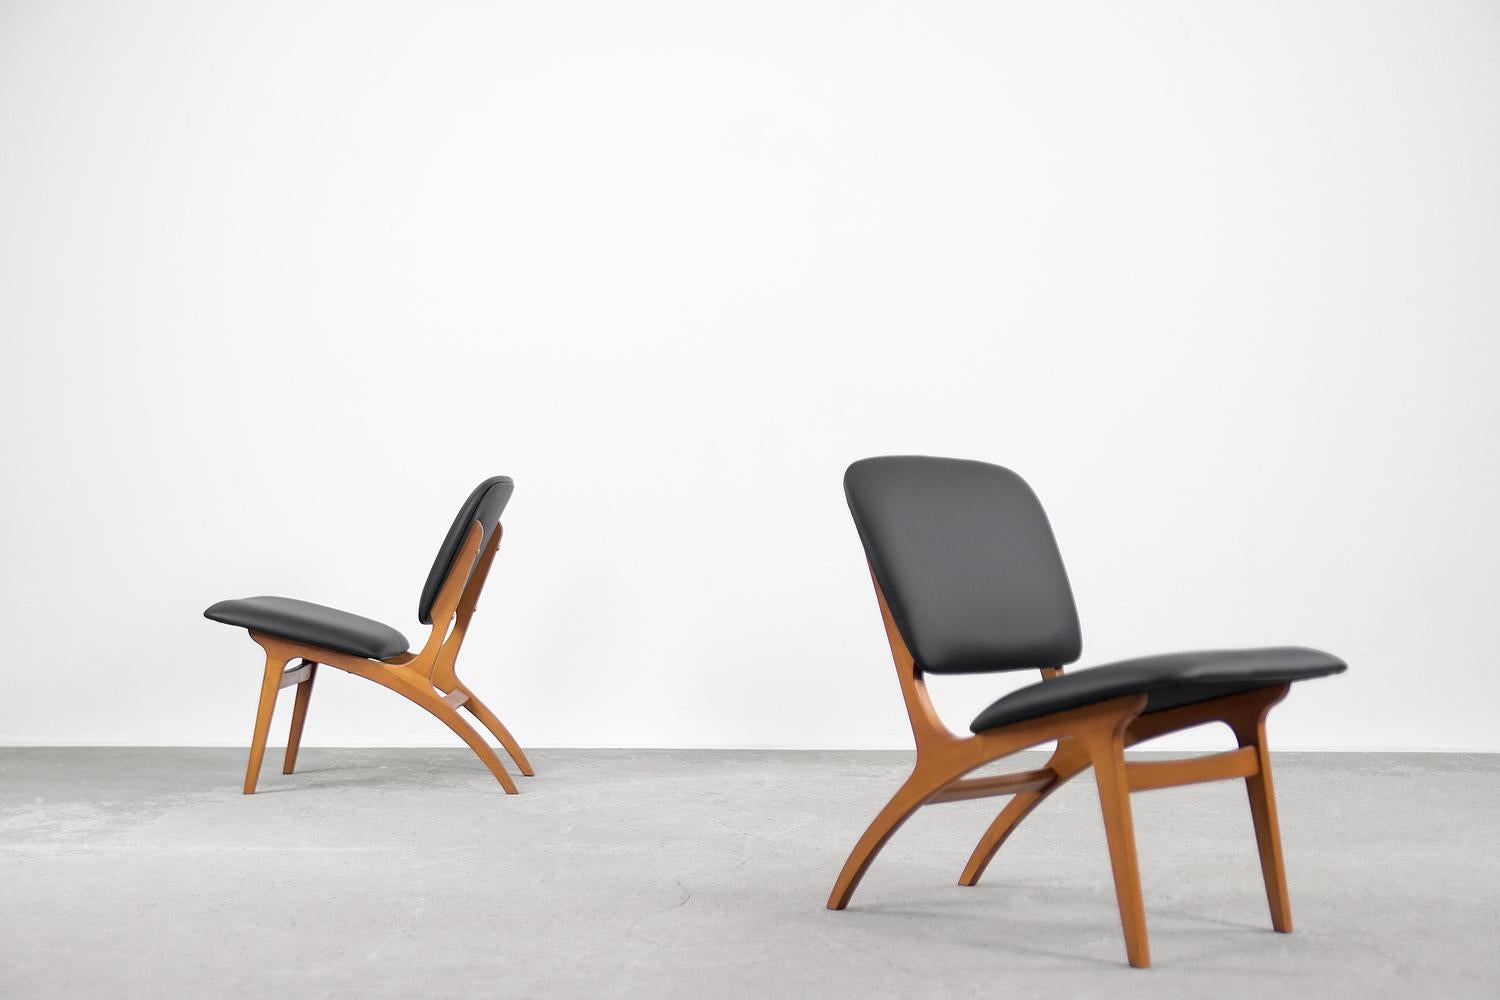 Pair of Mid-Century Modern Vintage Jylland Beech Wood Chairs from Jio Möbler In Good Condition For Sale In Warszawa, Mazowieckie